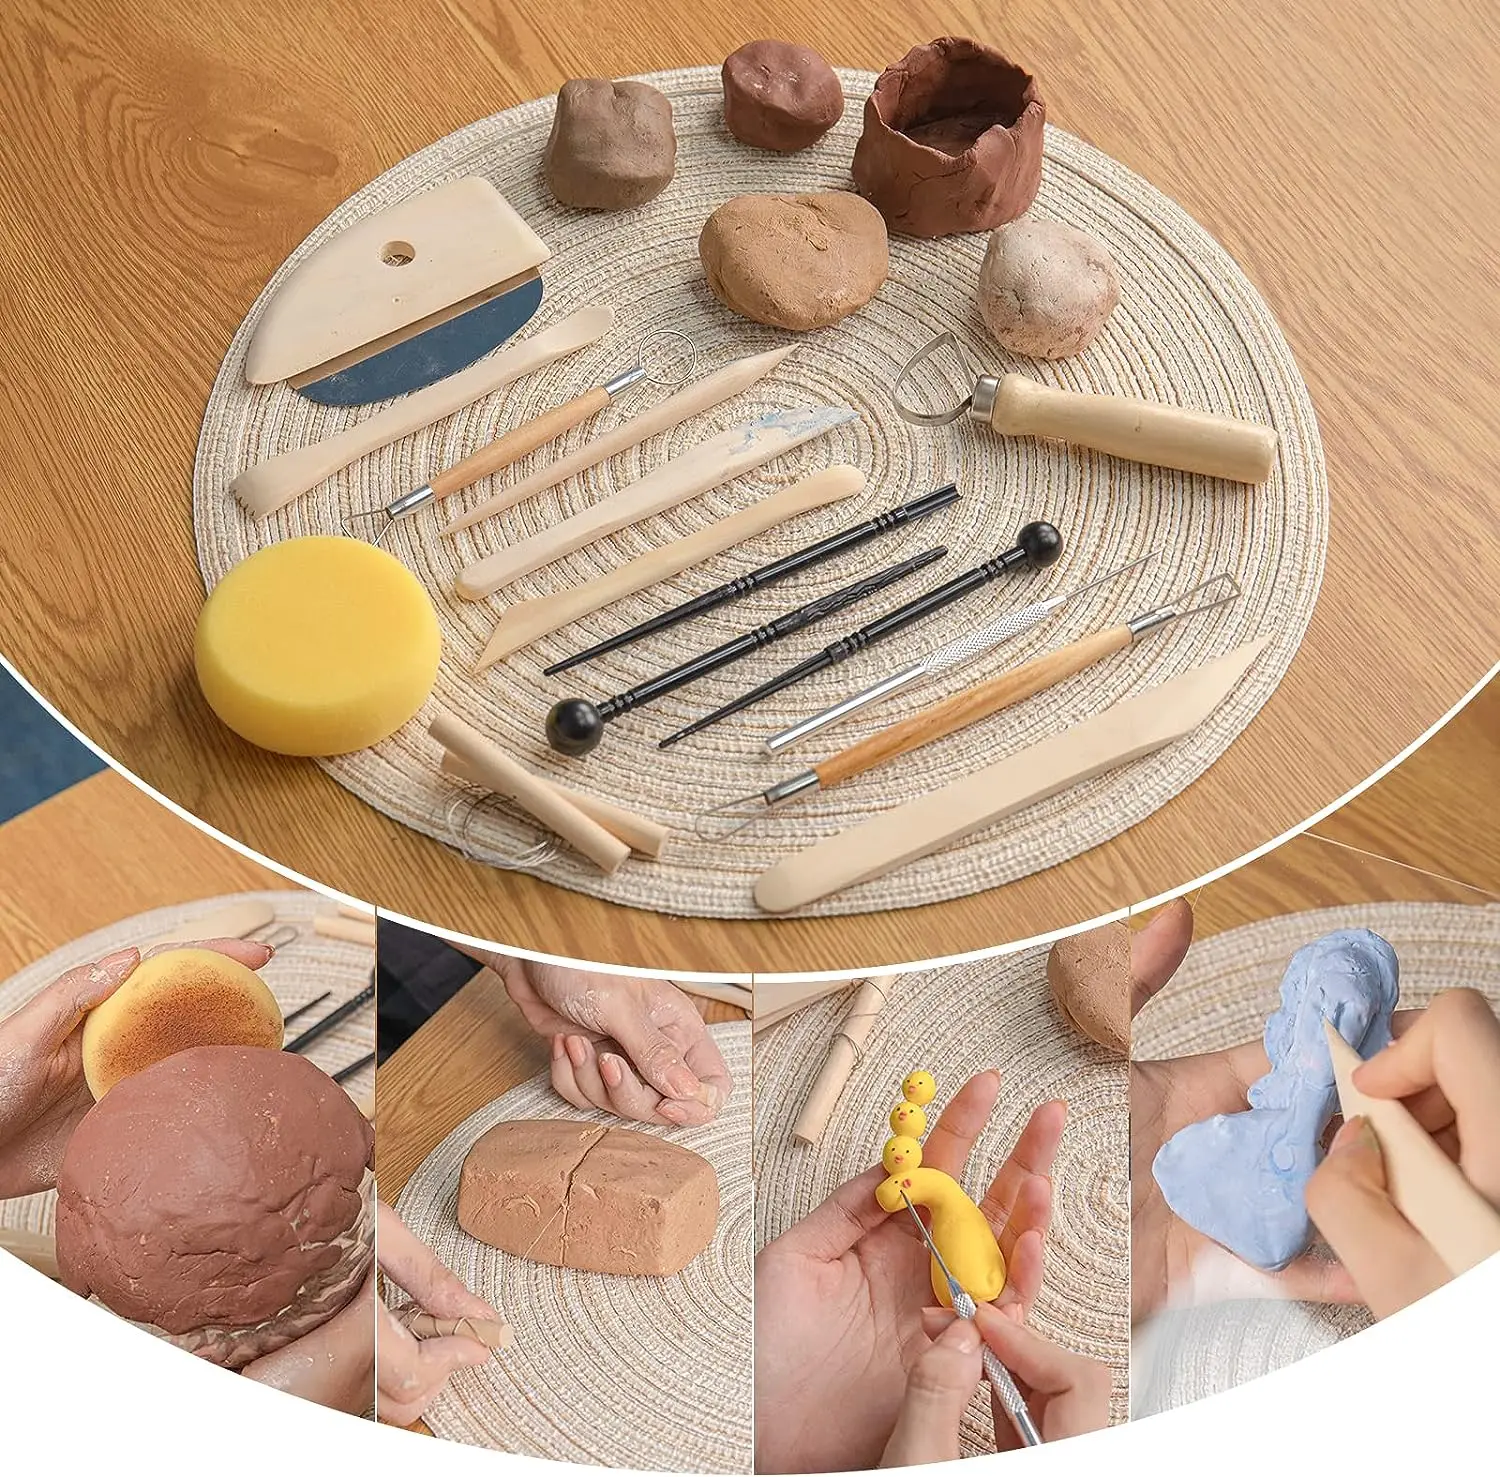 17pcs Pottery Sculpting Tools Set Ceramic Detail texture Shaping Blade Clay Modeling Stainless Steel Tool Kit Carving Hole Punch